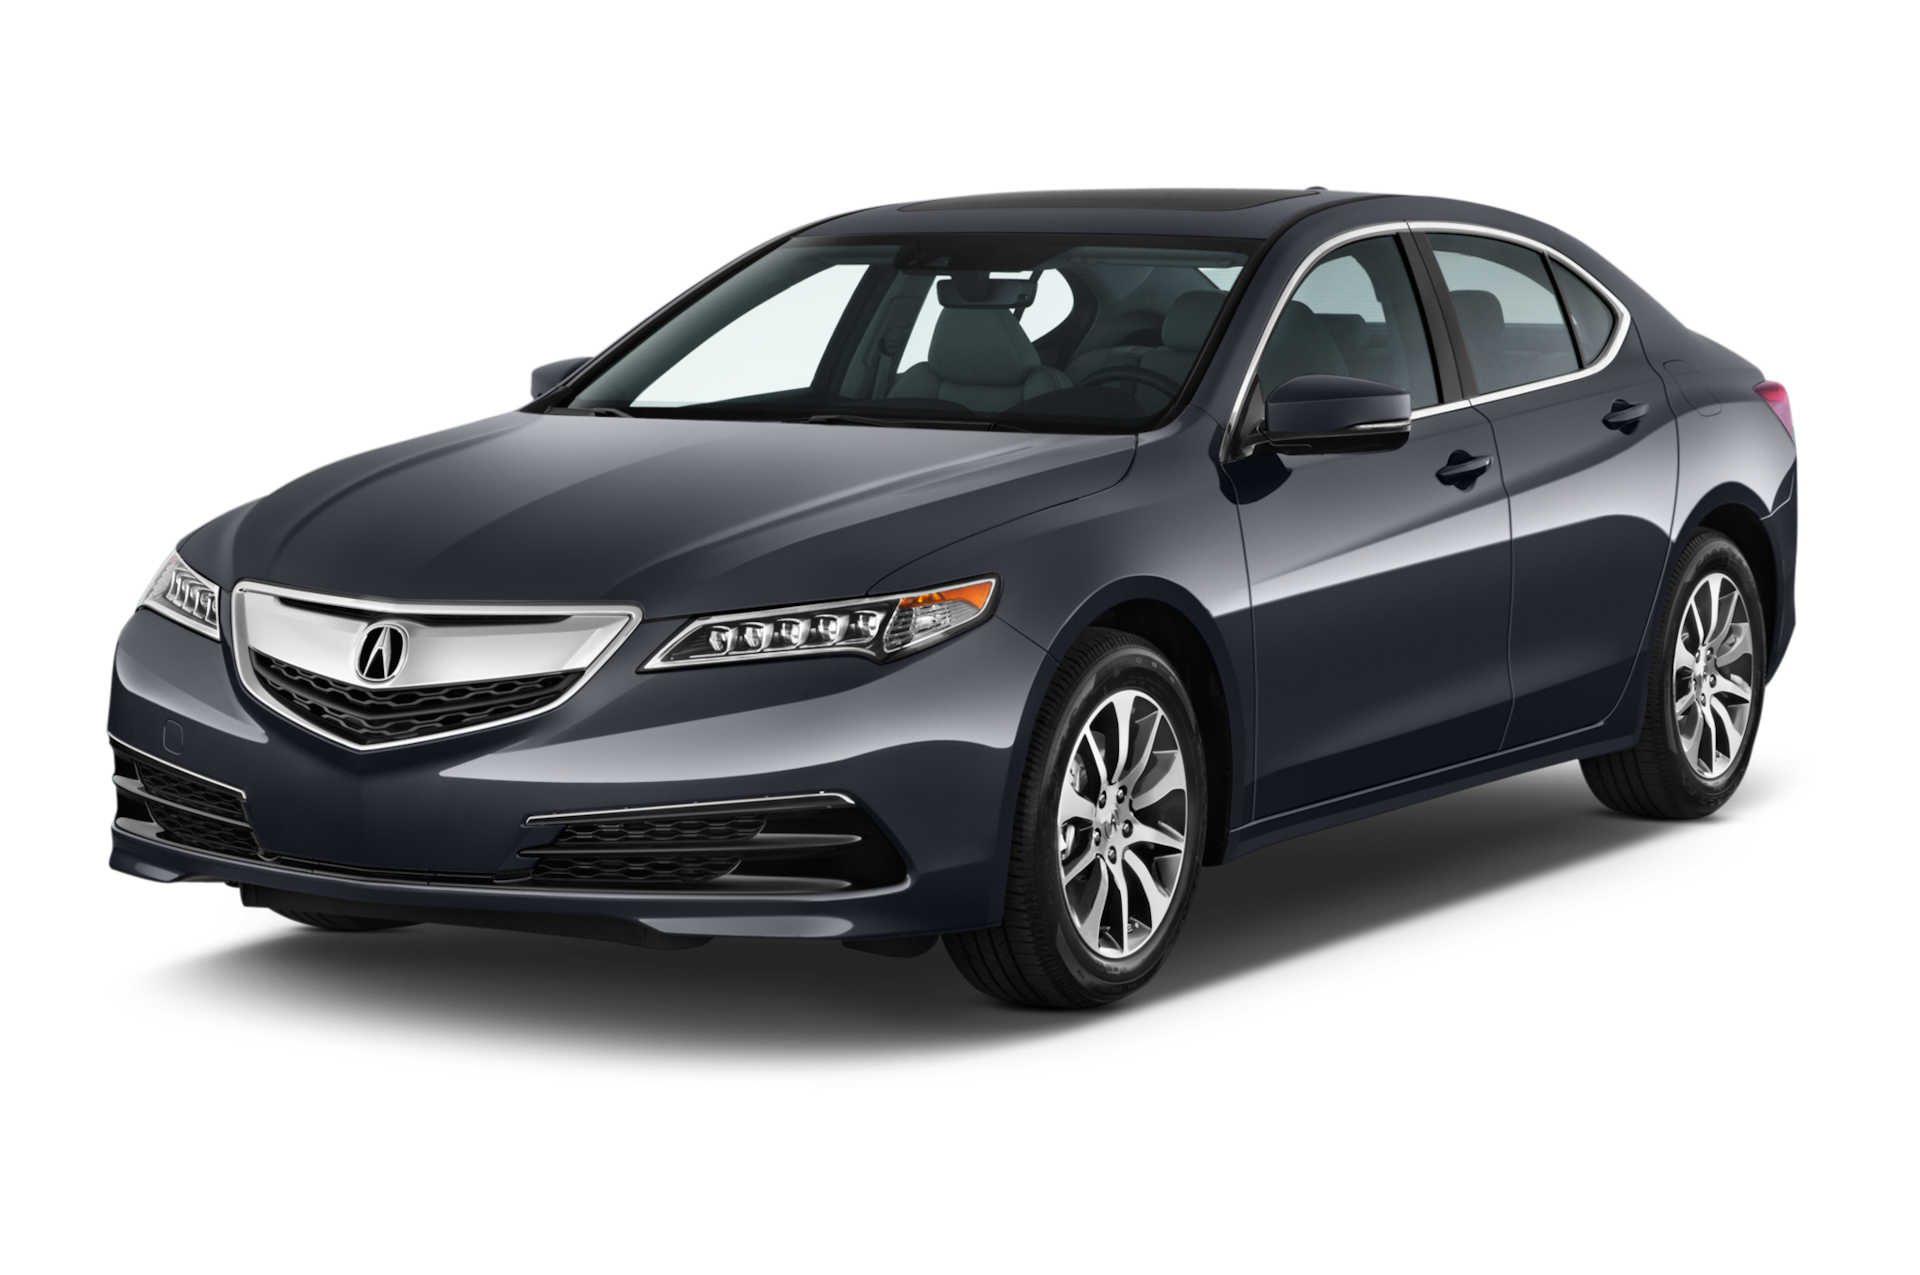 2015 Acura TLX Prices, Reviews, and Photos - MotorTrend